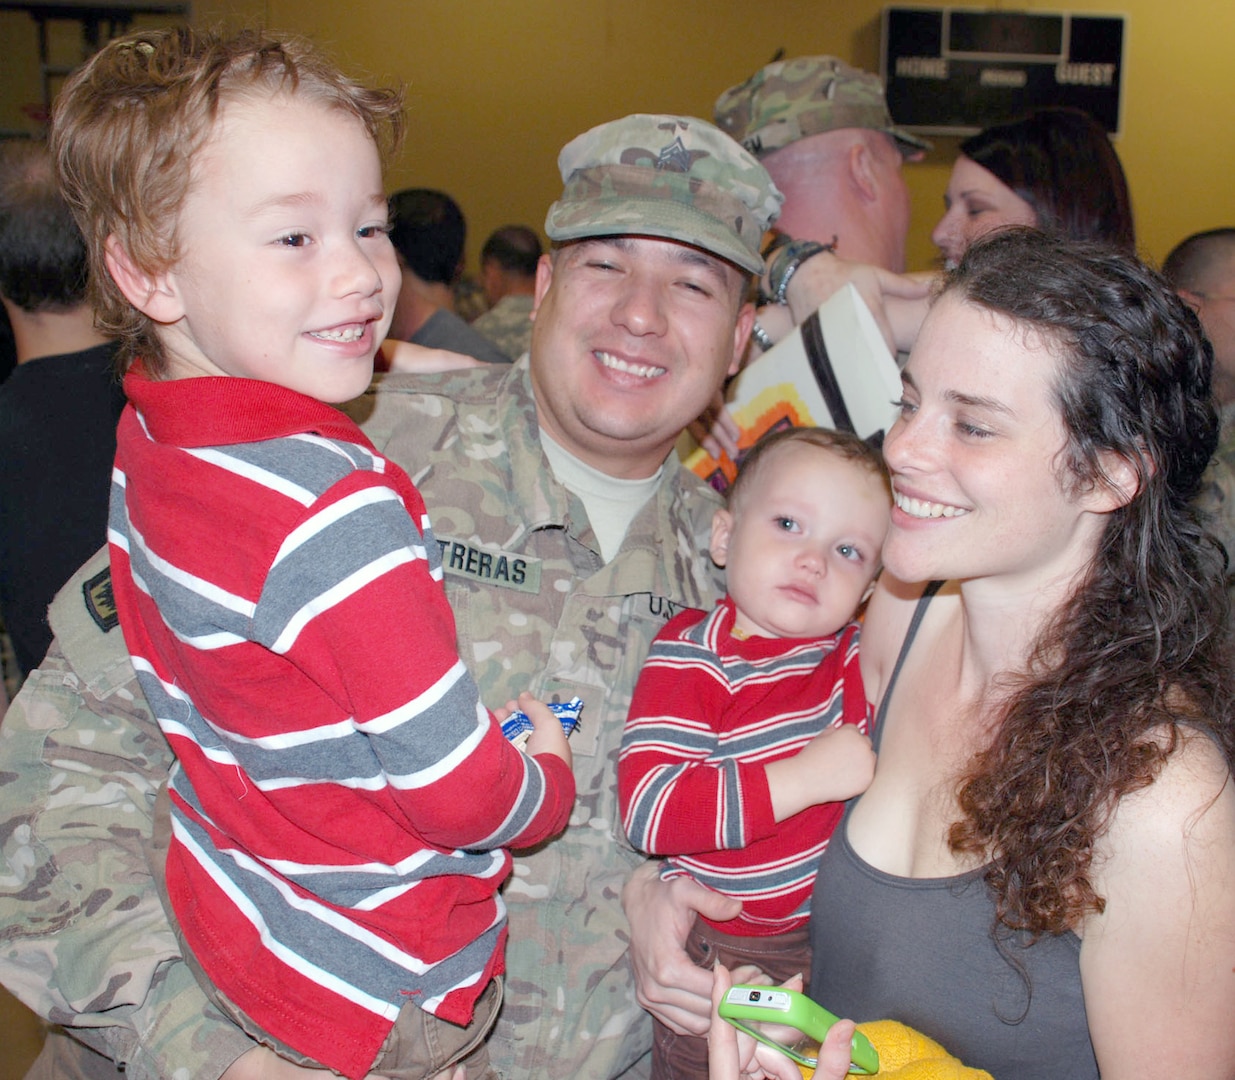 Family members greet Soldiers with hugs and kisses after the 14th Military Intelligence Battalion was dismissed. The Soldiers will have some reintegration training during their first week home, then have 30 days of leave before resuming their military duties.
Photo by Gregory Ripps